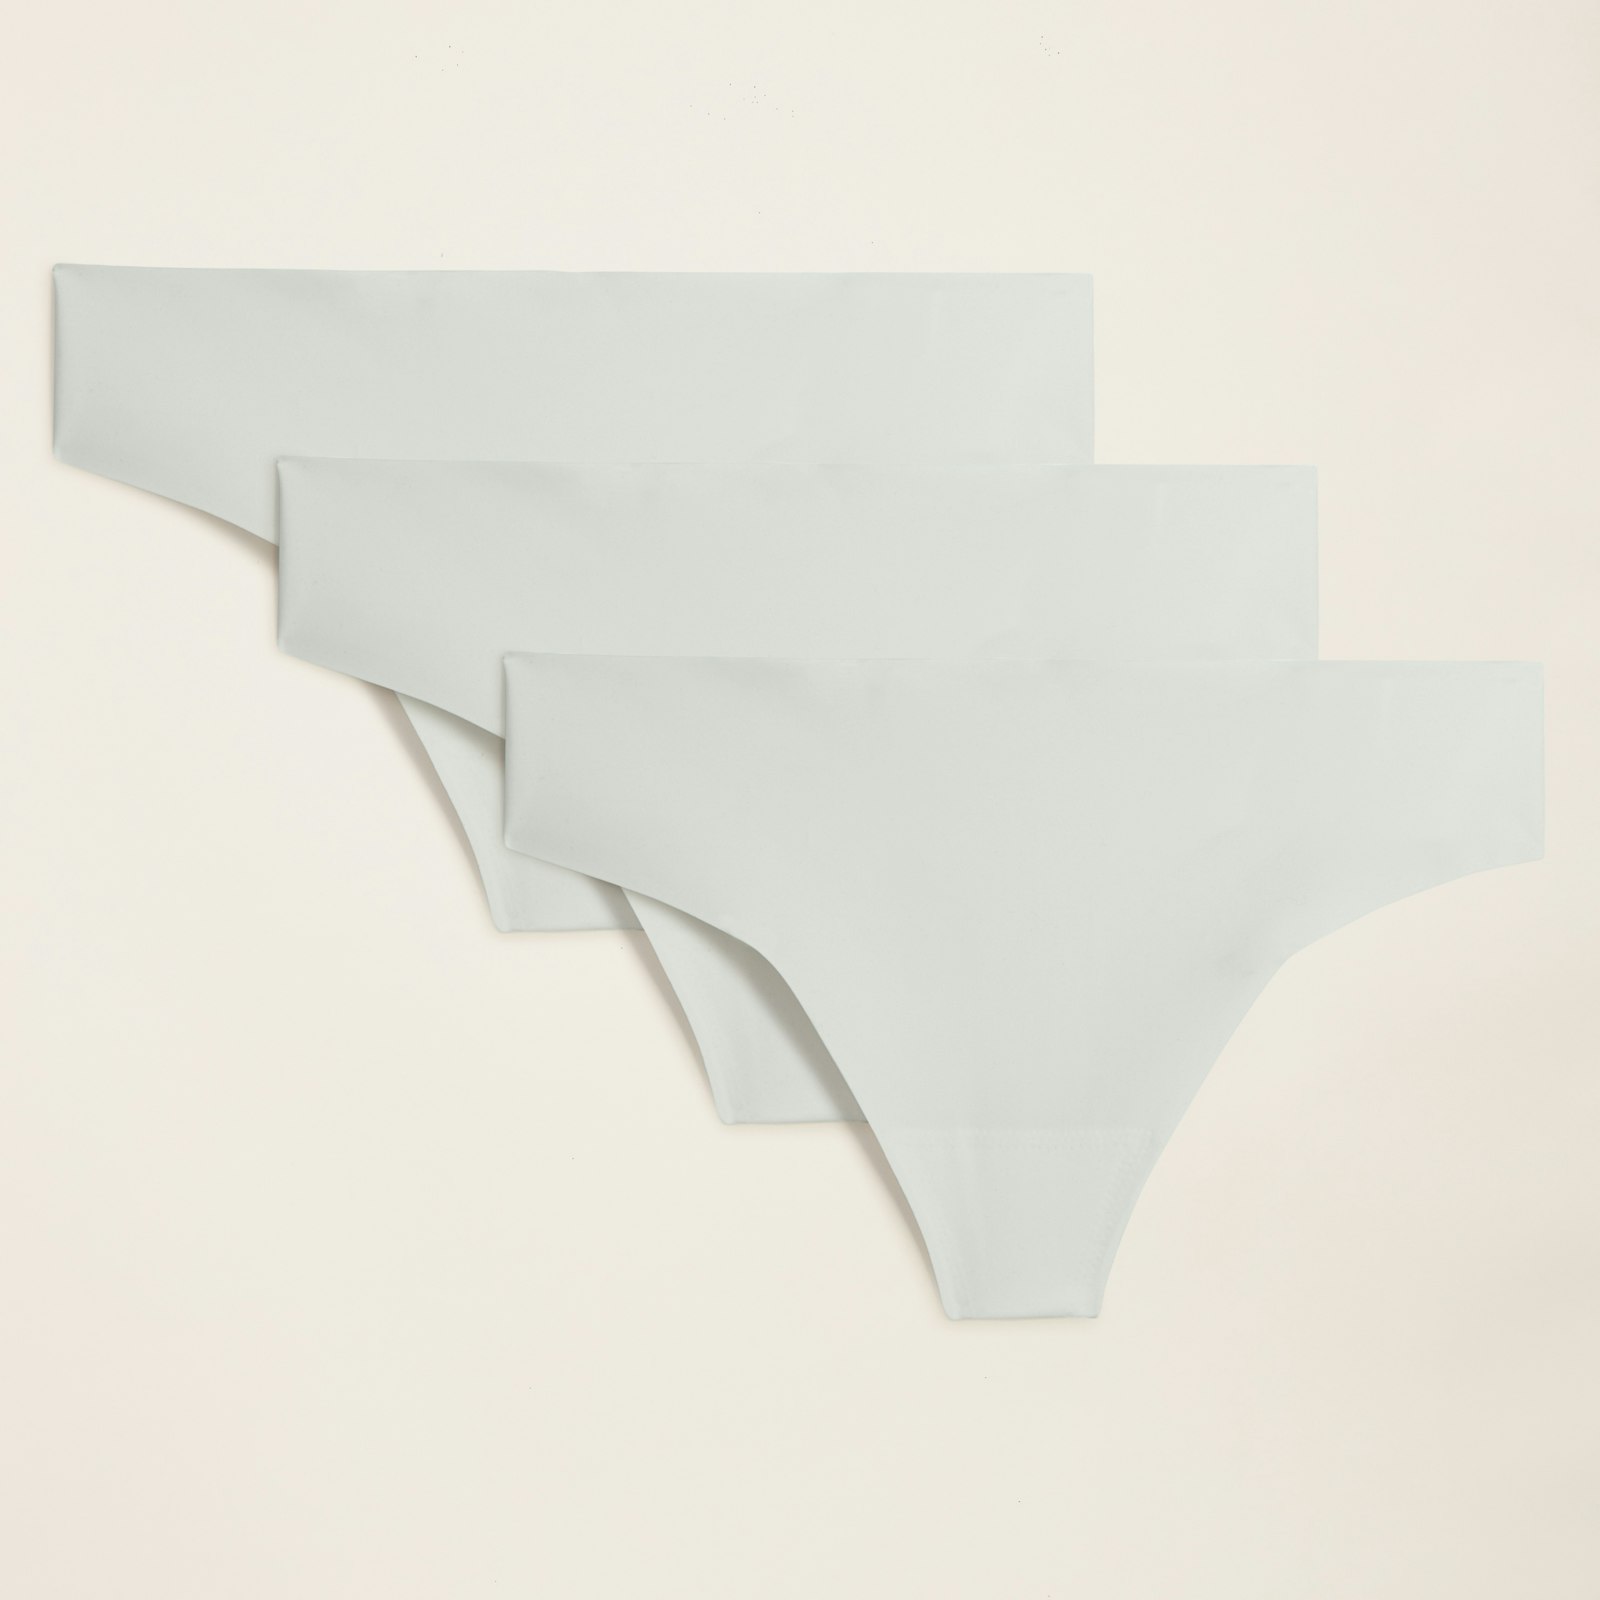 SeamlessThong_White_Womens_Product_Small_1x1_0178.jpg